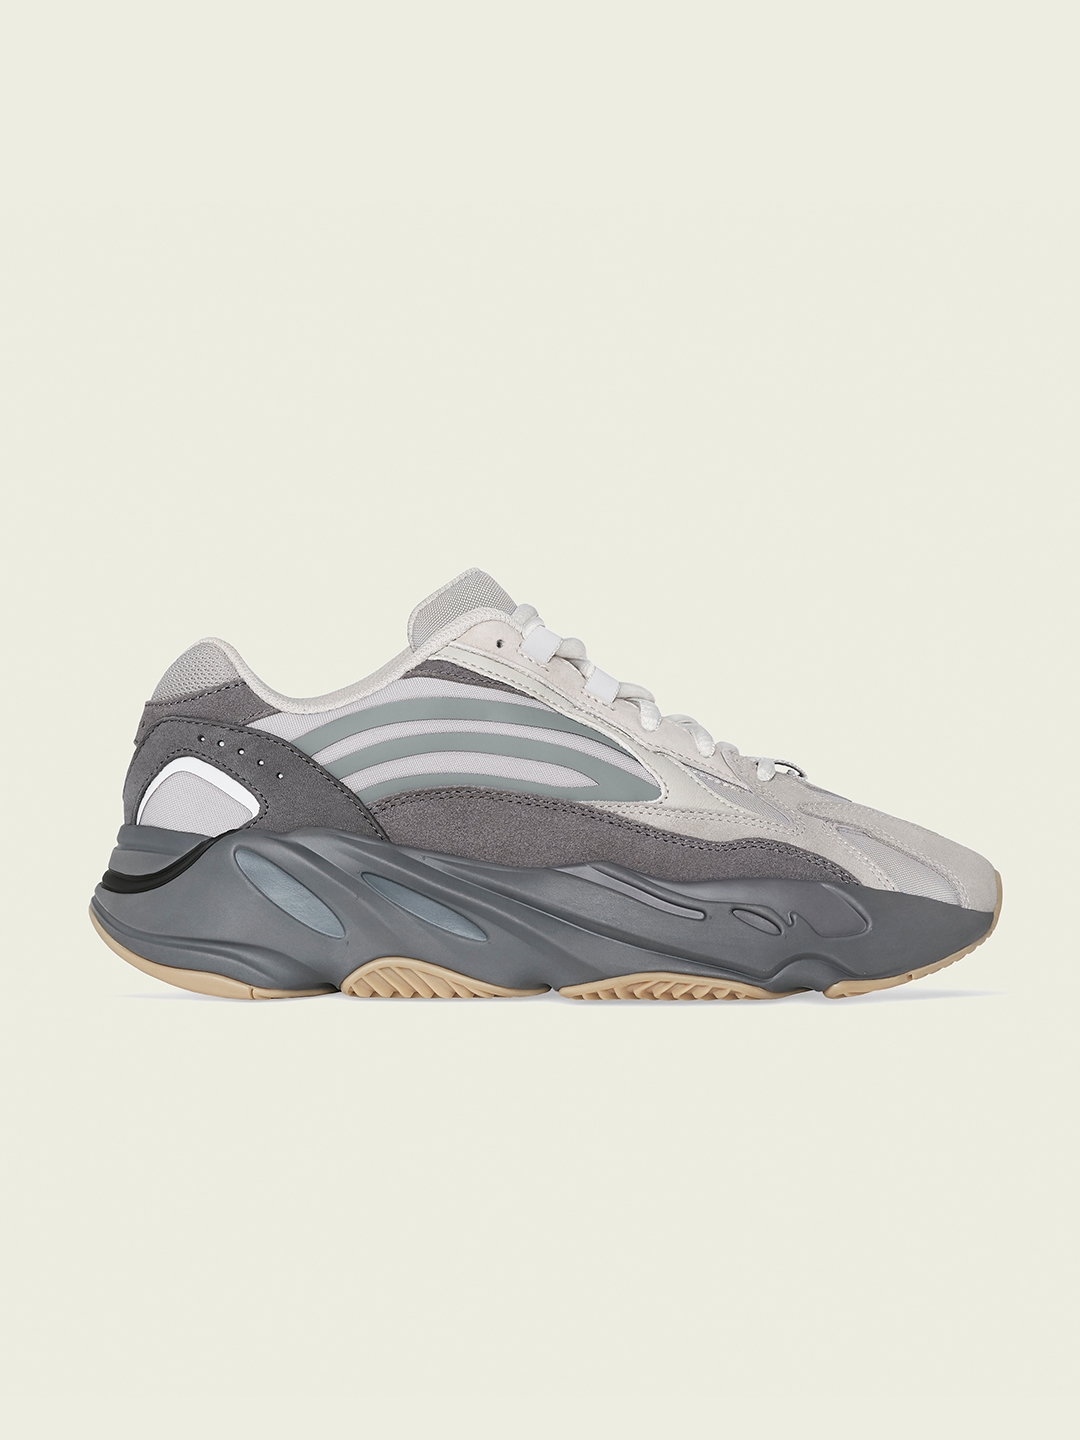 adidas yeezy 700 price in usa